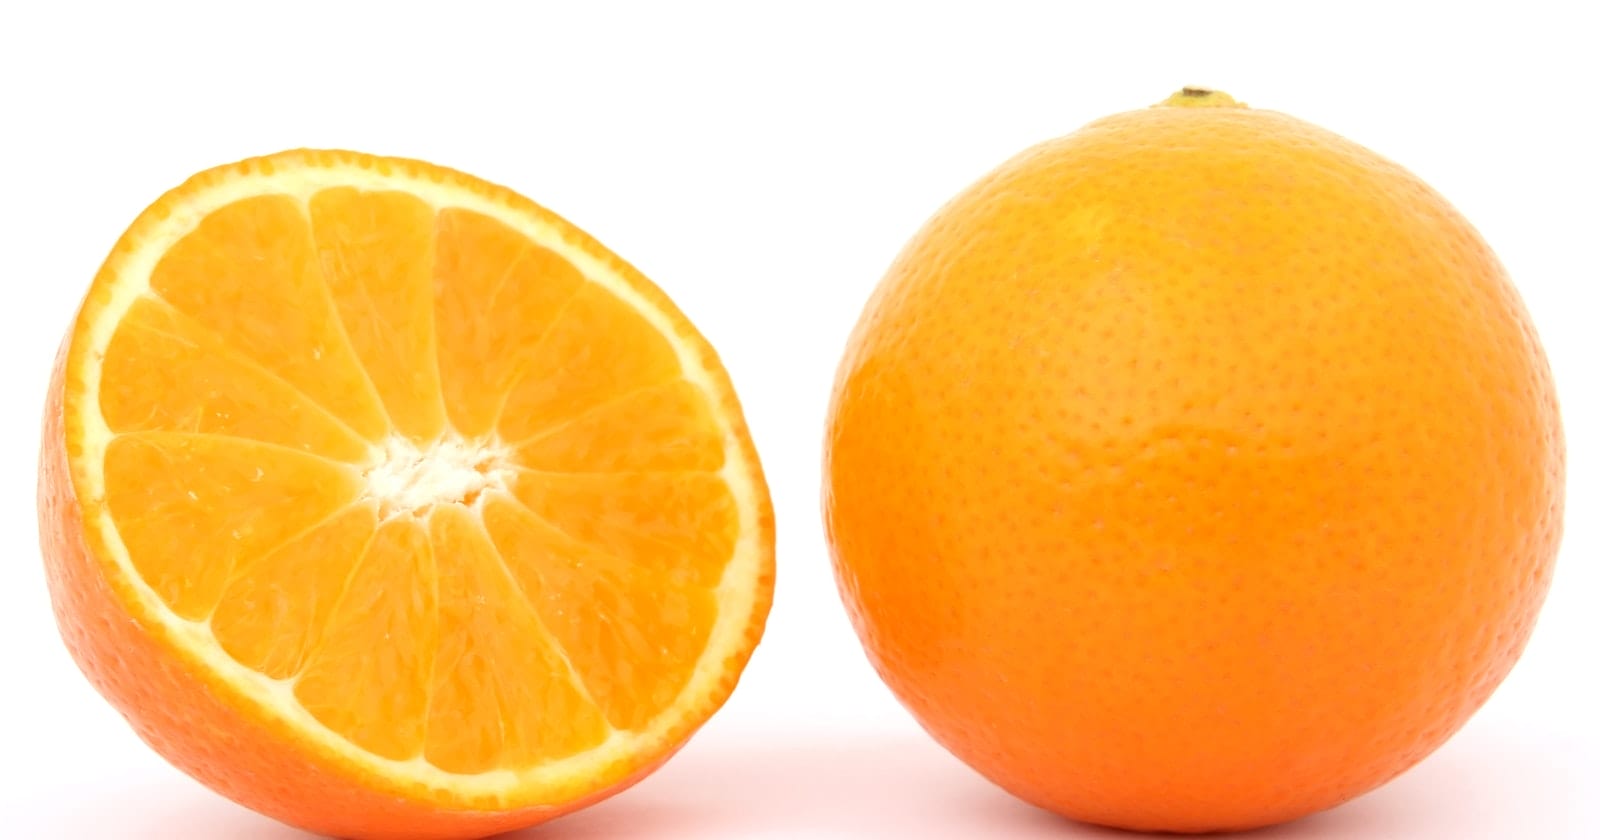 You are currently viewing Orange vs. Tangerine: What’s the Difference? – A Guide to Their Taste, Appearance, and Nutritional Value